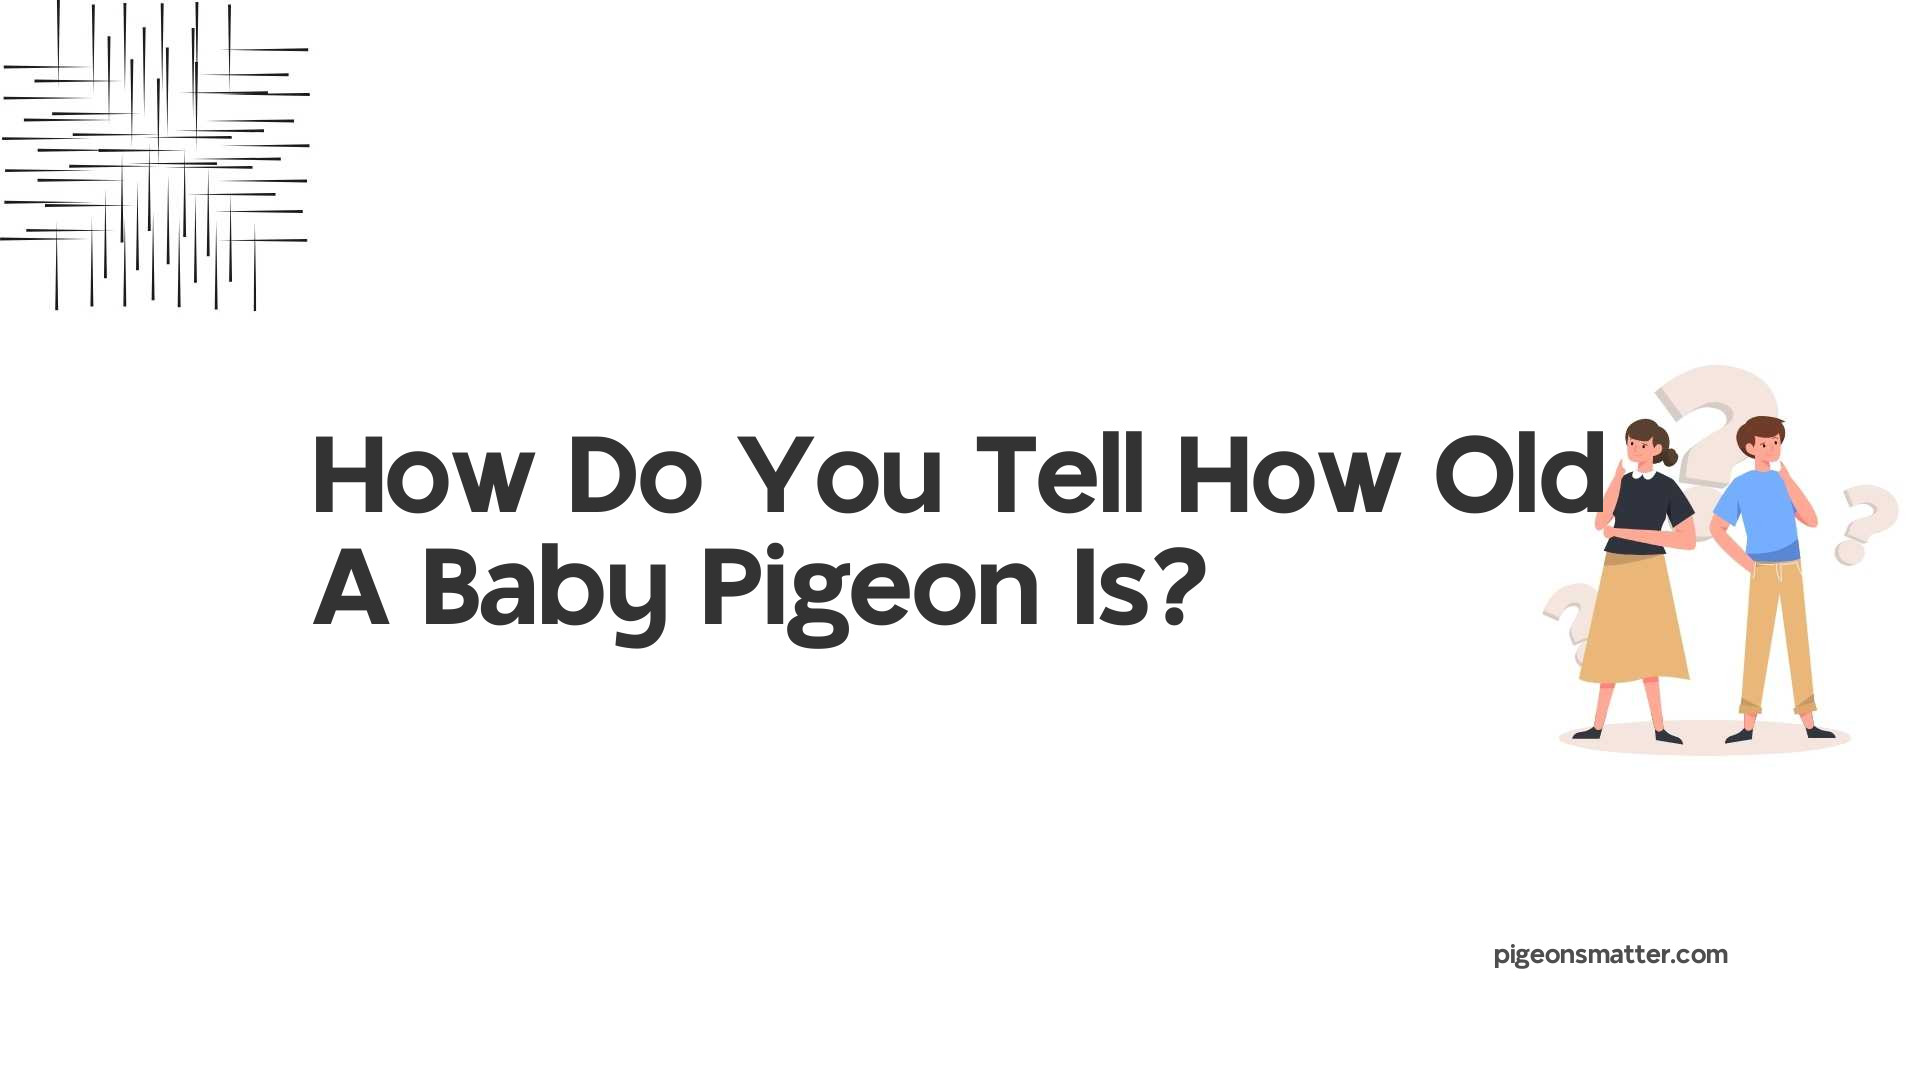 How Do You Tell How Old A Baby Pigeon Is?